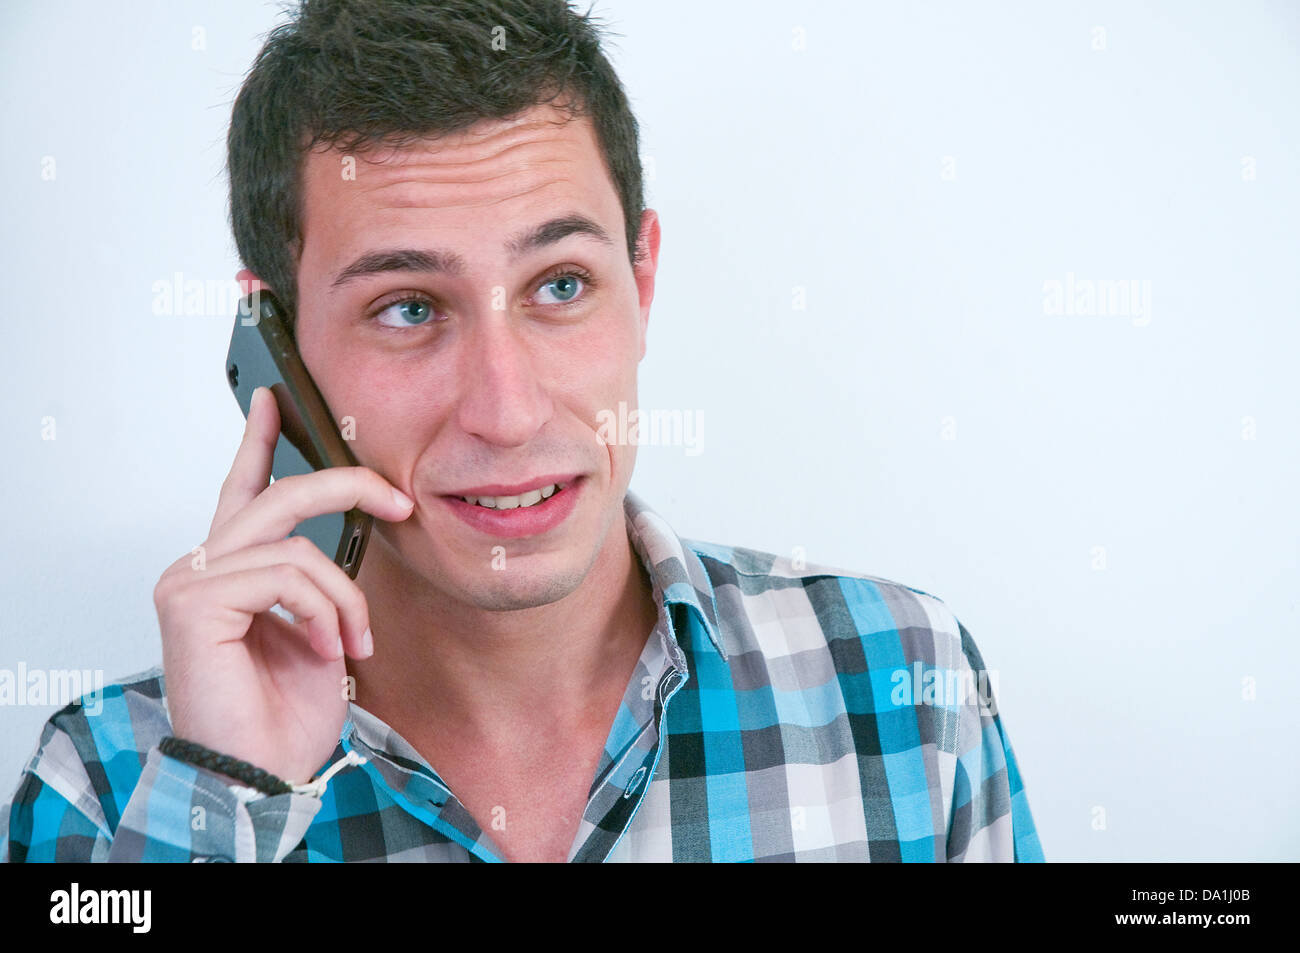 Young man using mobile phone. Close view. Stock Photo